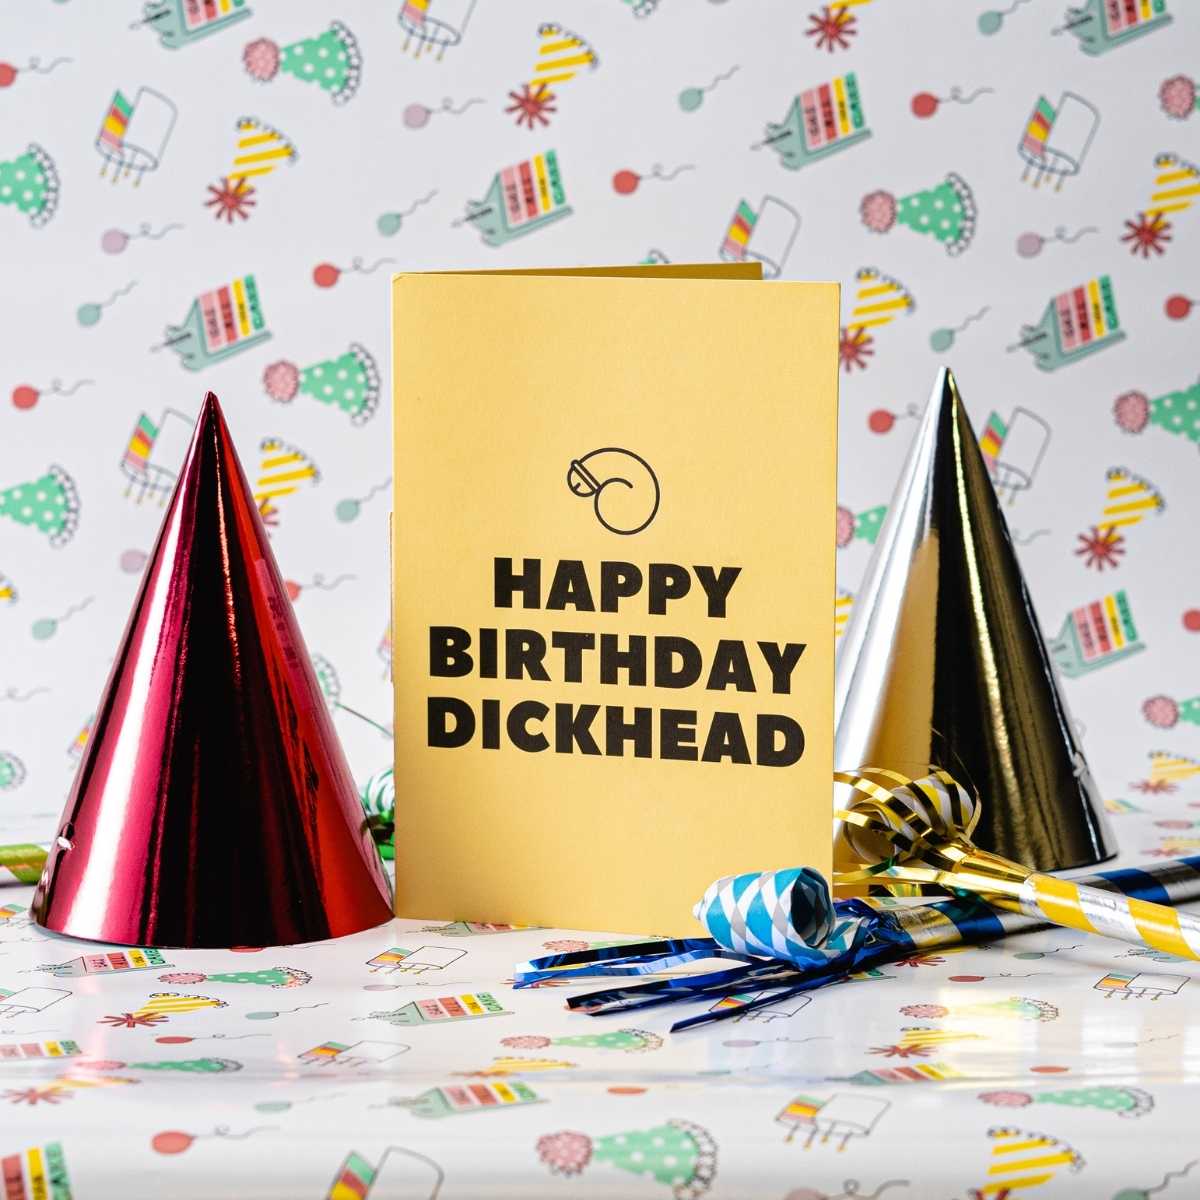 Happy Birthday D*ckhead! - Singing Birthday Greeting Card for Him Pranks Anonymous send hilarious pranks and gag gifts to your friends or family.